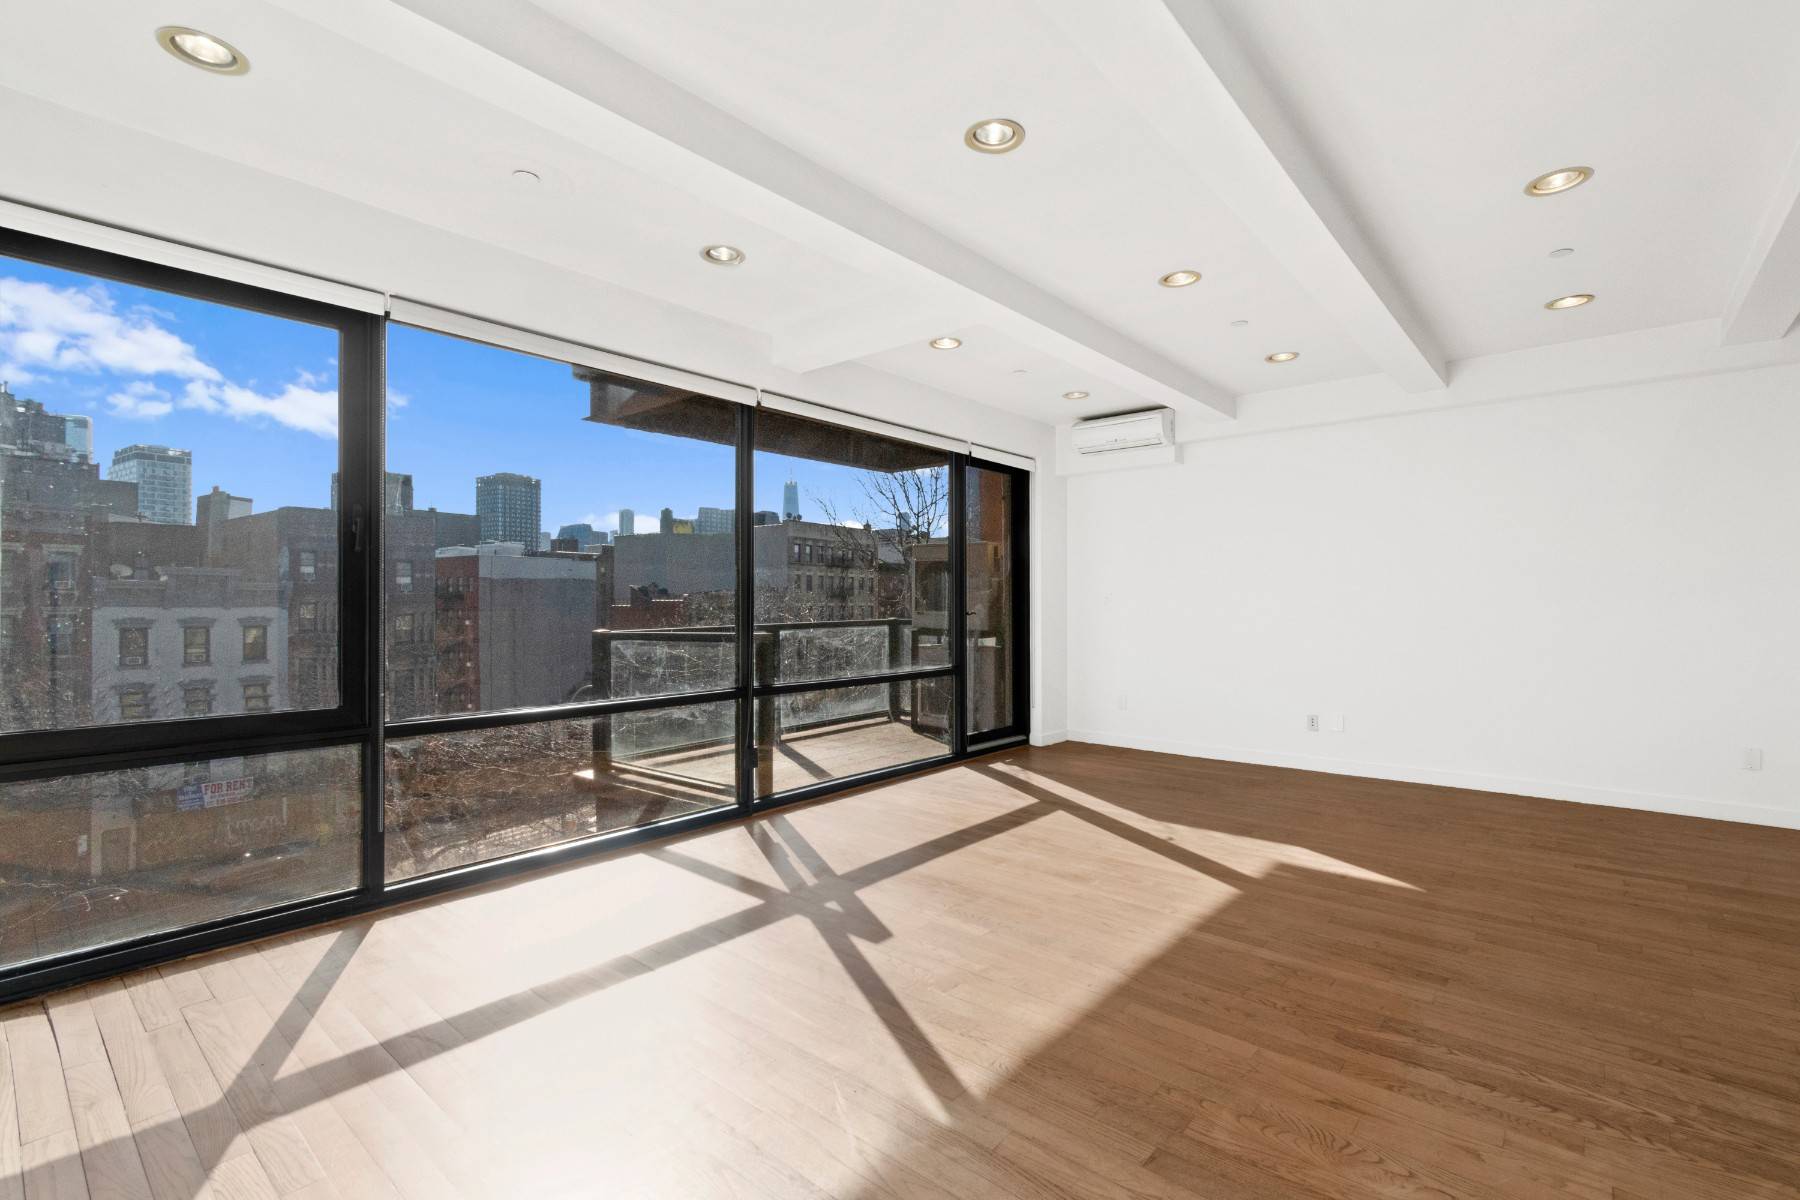 Perched on the fifth floor with incredible views of Lower Manhattan, this floor through two bedroom, one bathroom residence enjoys generous sun drenched rooms and a gracious balcony.